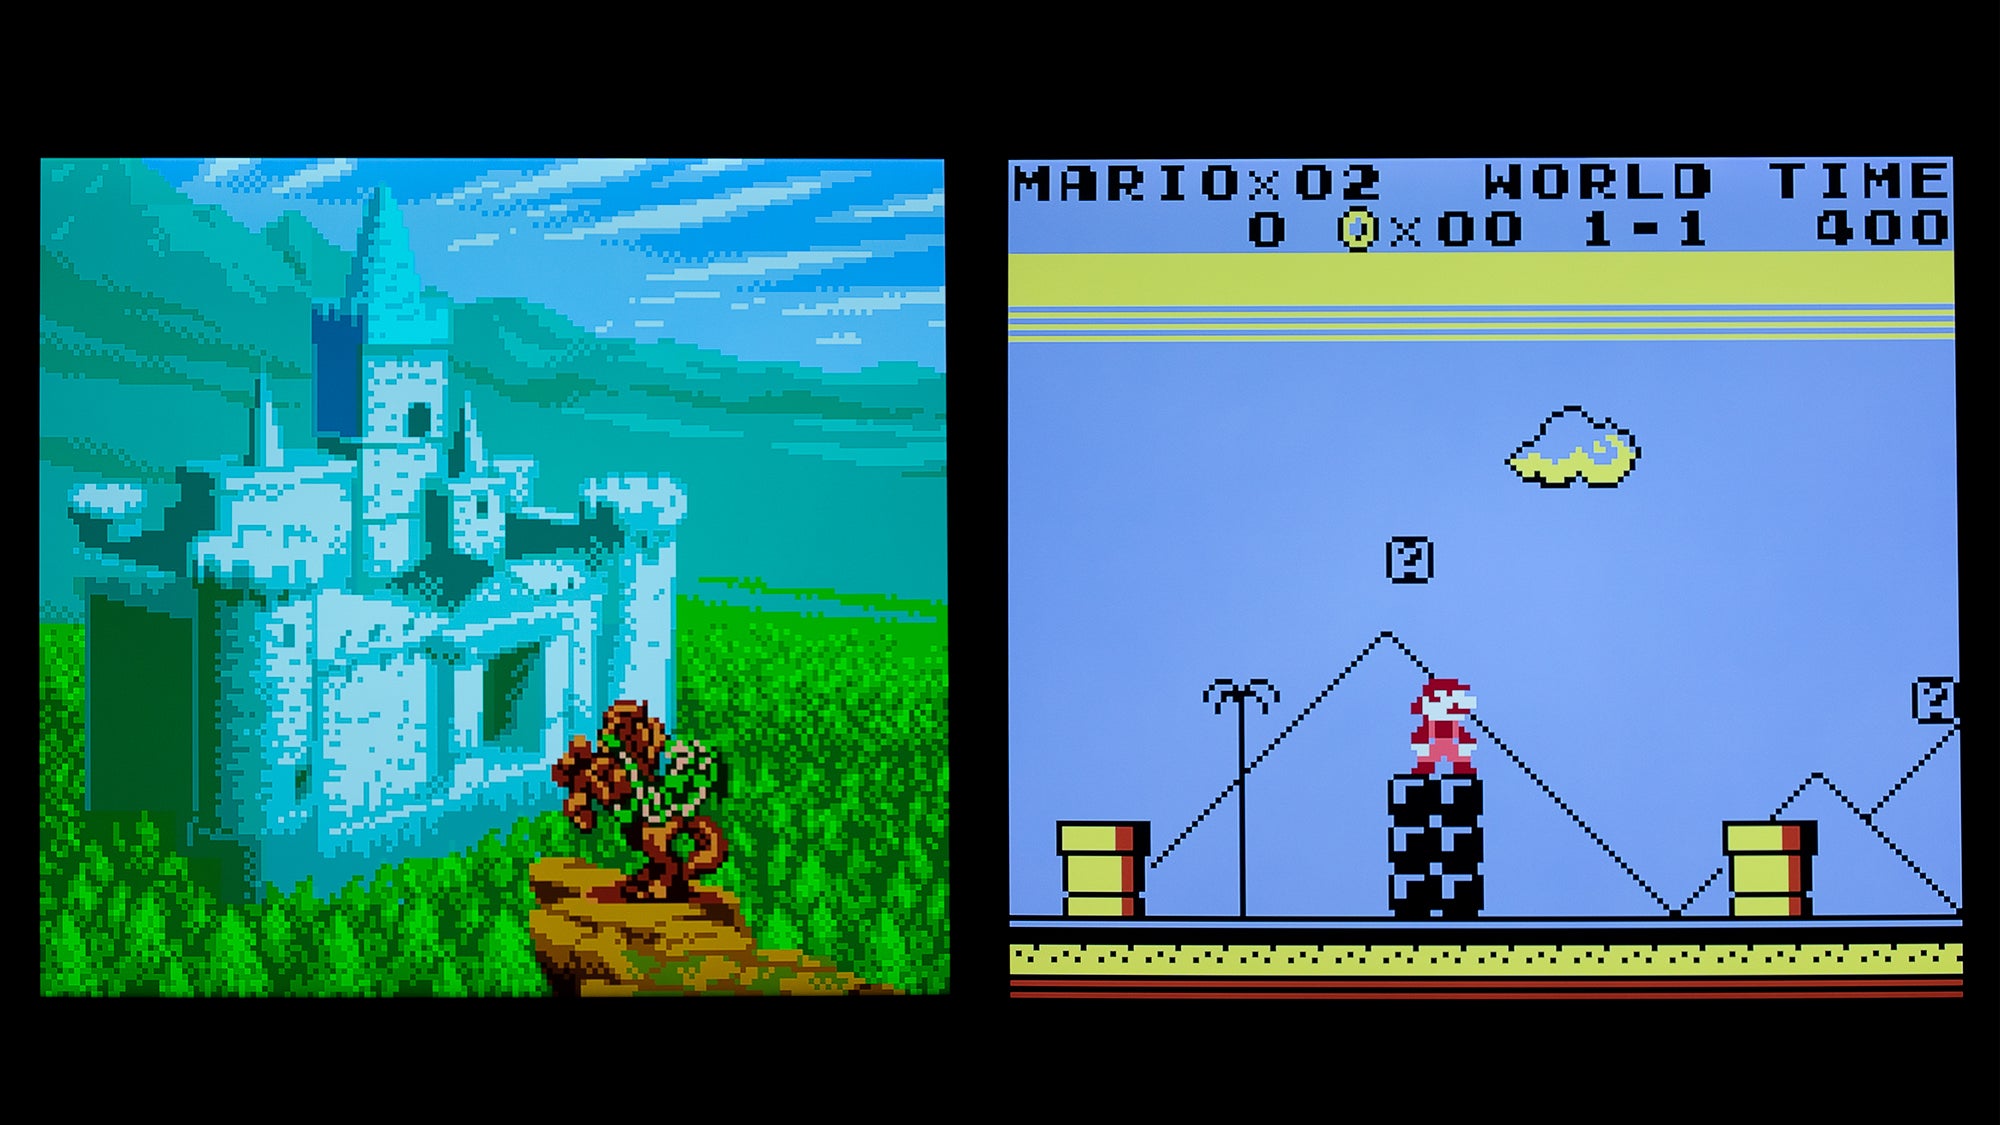 Game Boy and Game Boy Colour games look great when played on a 4K TV through the Retron Sq, but there's no upscaling or interpolation so games will look extra pixelated. (Photo: Andrew Liszewski/Gizmodo)